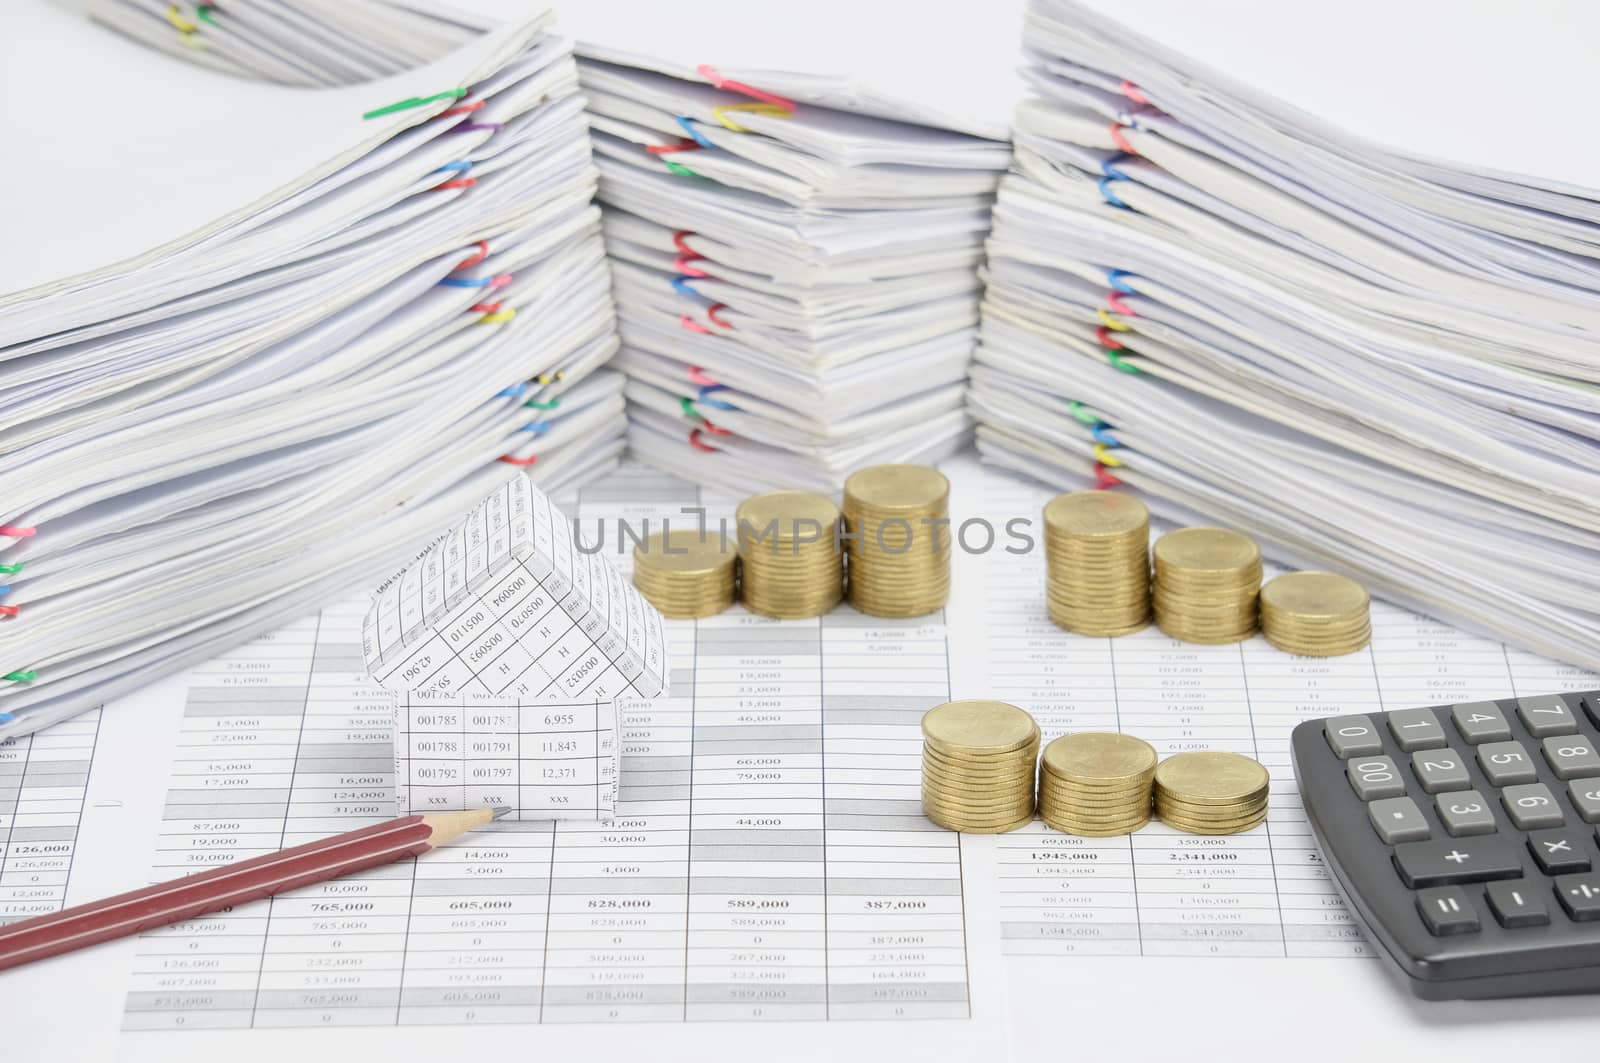 House and brown pencil on finance account have step pile of gold coins and calculator with overload of paperwork with colorful paperclip as background.